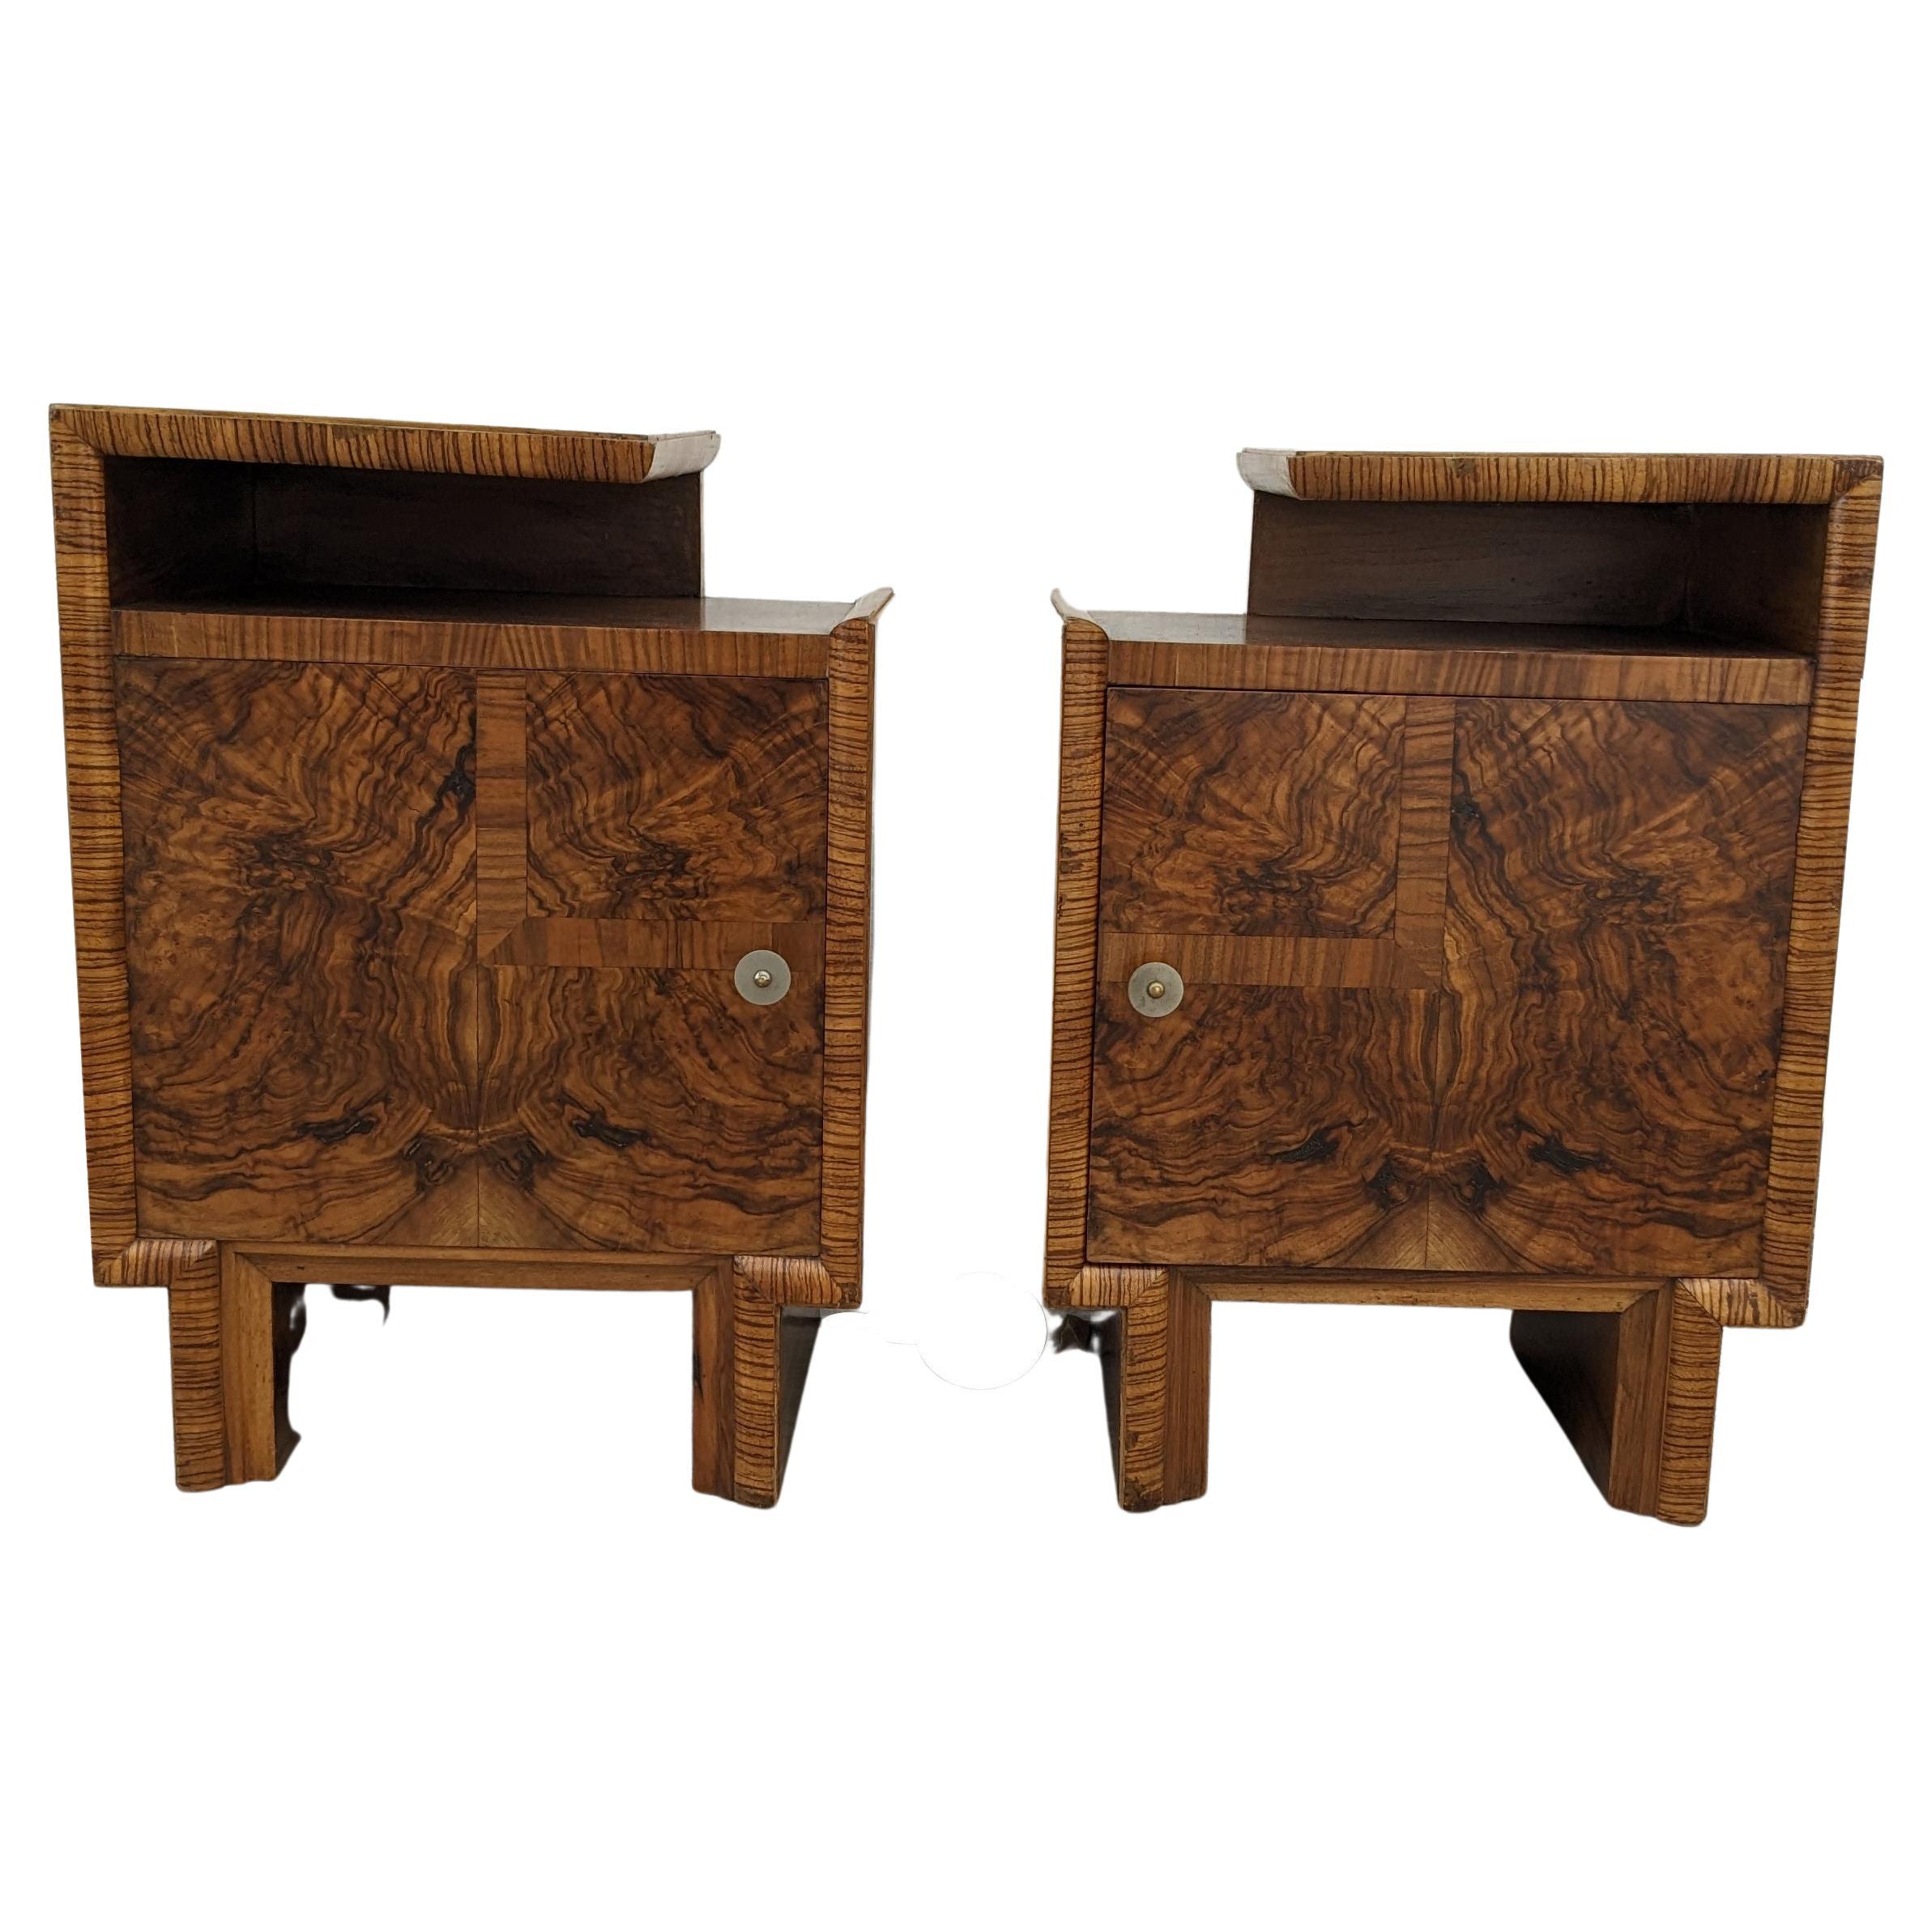 A rare opportunity to acquire such a high styled pair of original Art Deco bedside table nightstands. Originating from Italy and dating to the early 1930s they fill both the highly desired shape of Art Deco at its best with the luscious exotic